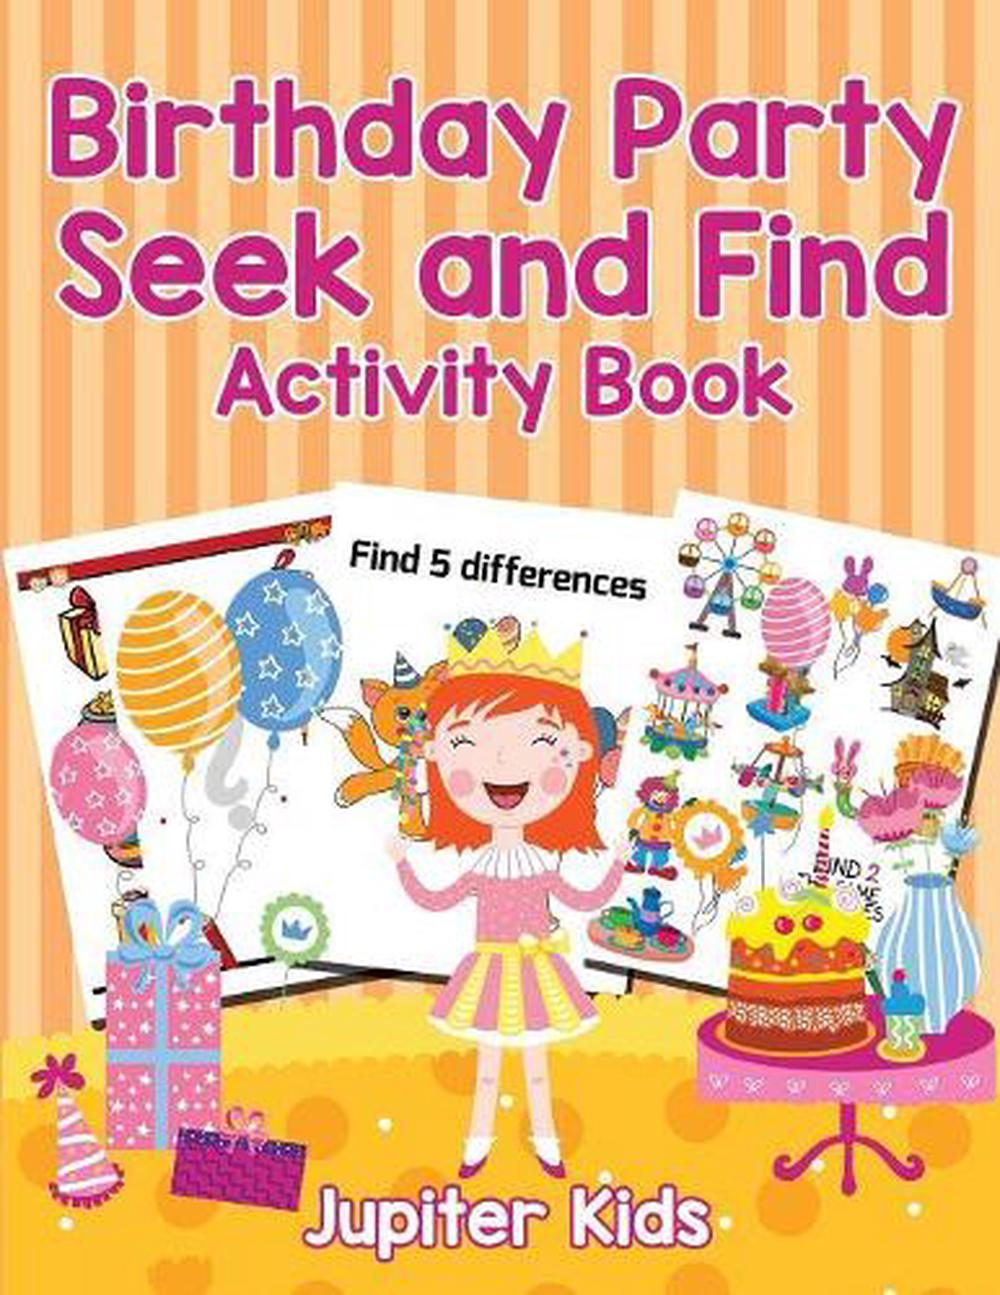 Birthday Party Seek and Find Activity Book by Jupiter Kids (English ...